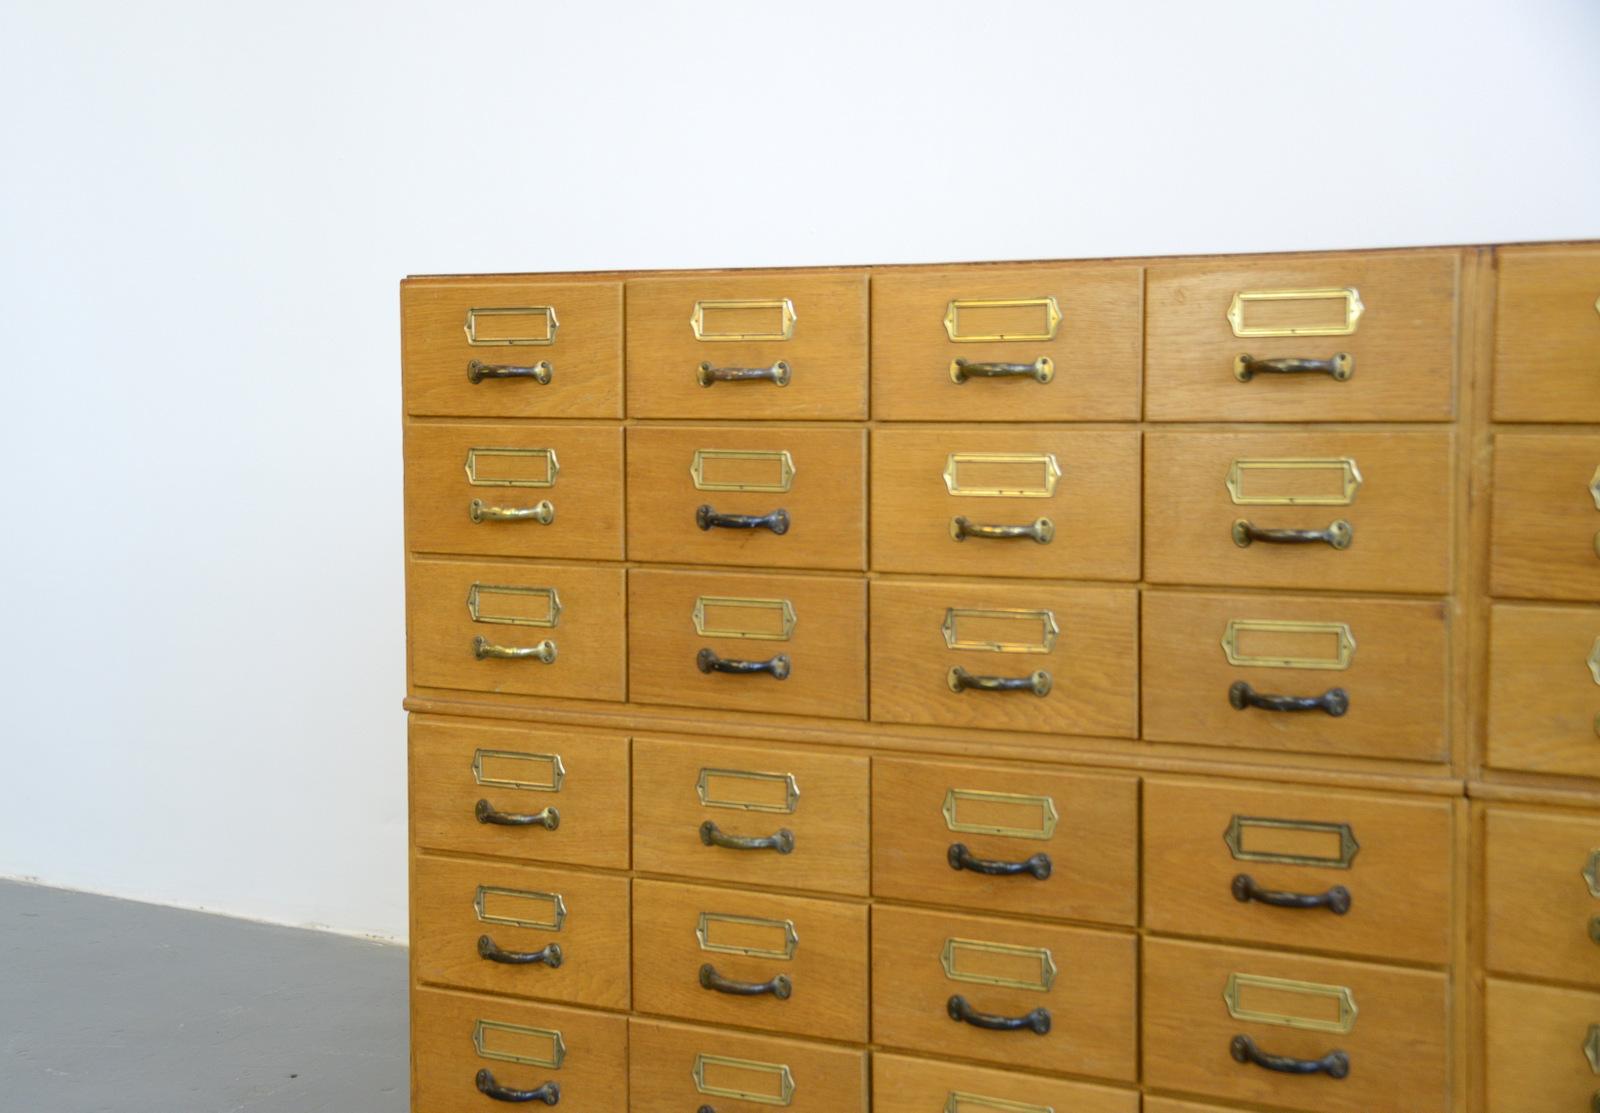 Bank of light oak filing drawers, circa 1950s

- Light oak drawers and frame
- Steel handles and card holders
- Ply drawer bottoms
- German ~ 1950s
- 188cm wide x 91cm tall x 48cm deep

Condition Report

Fully restored with minimal